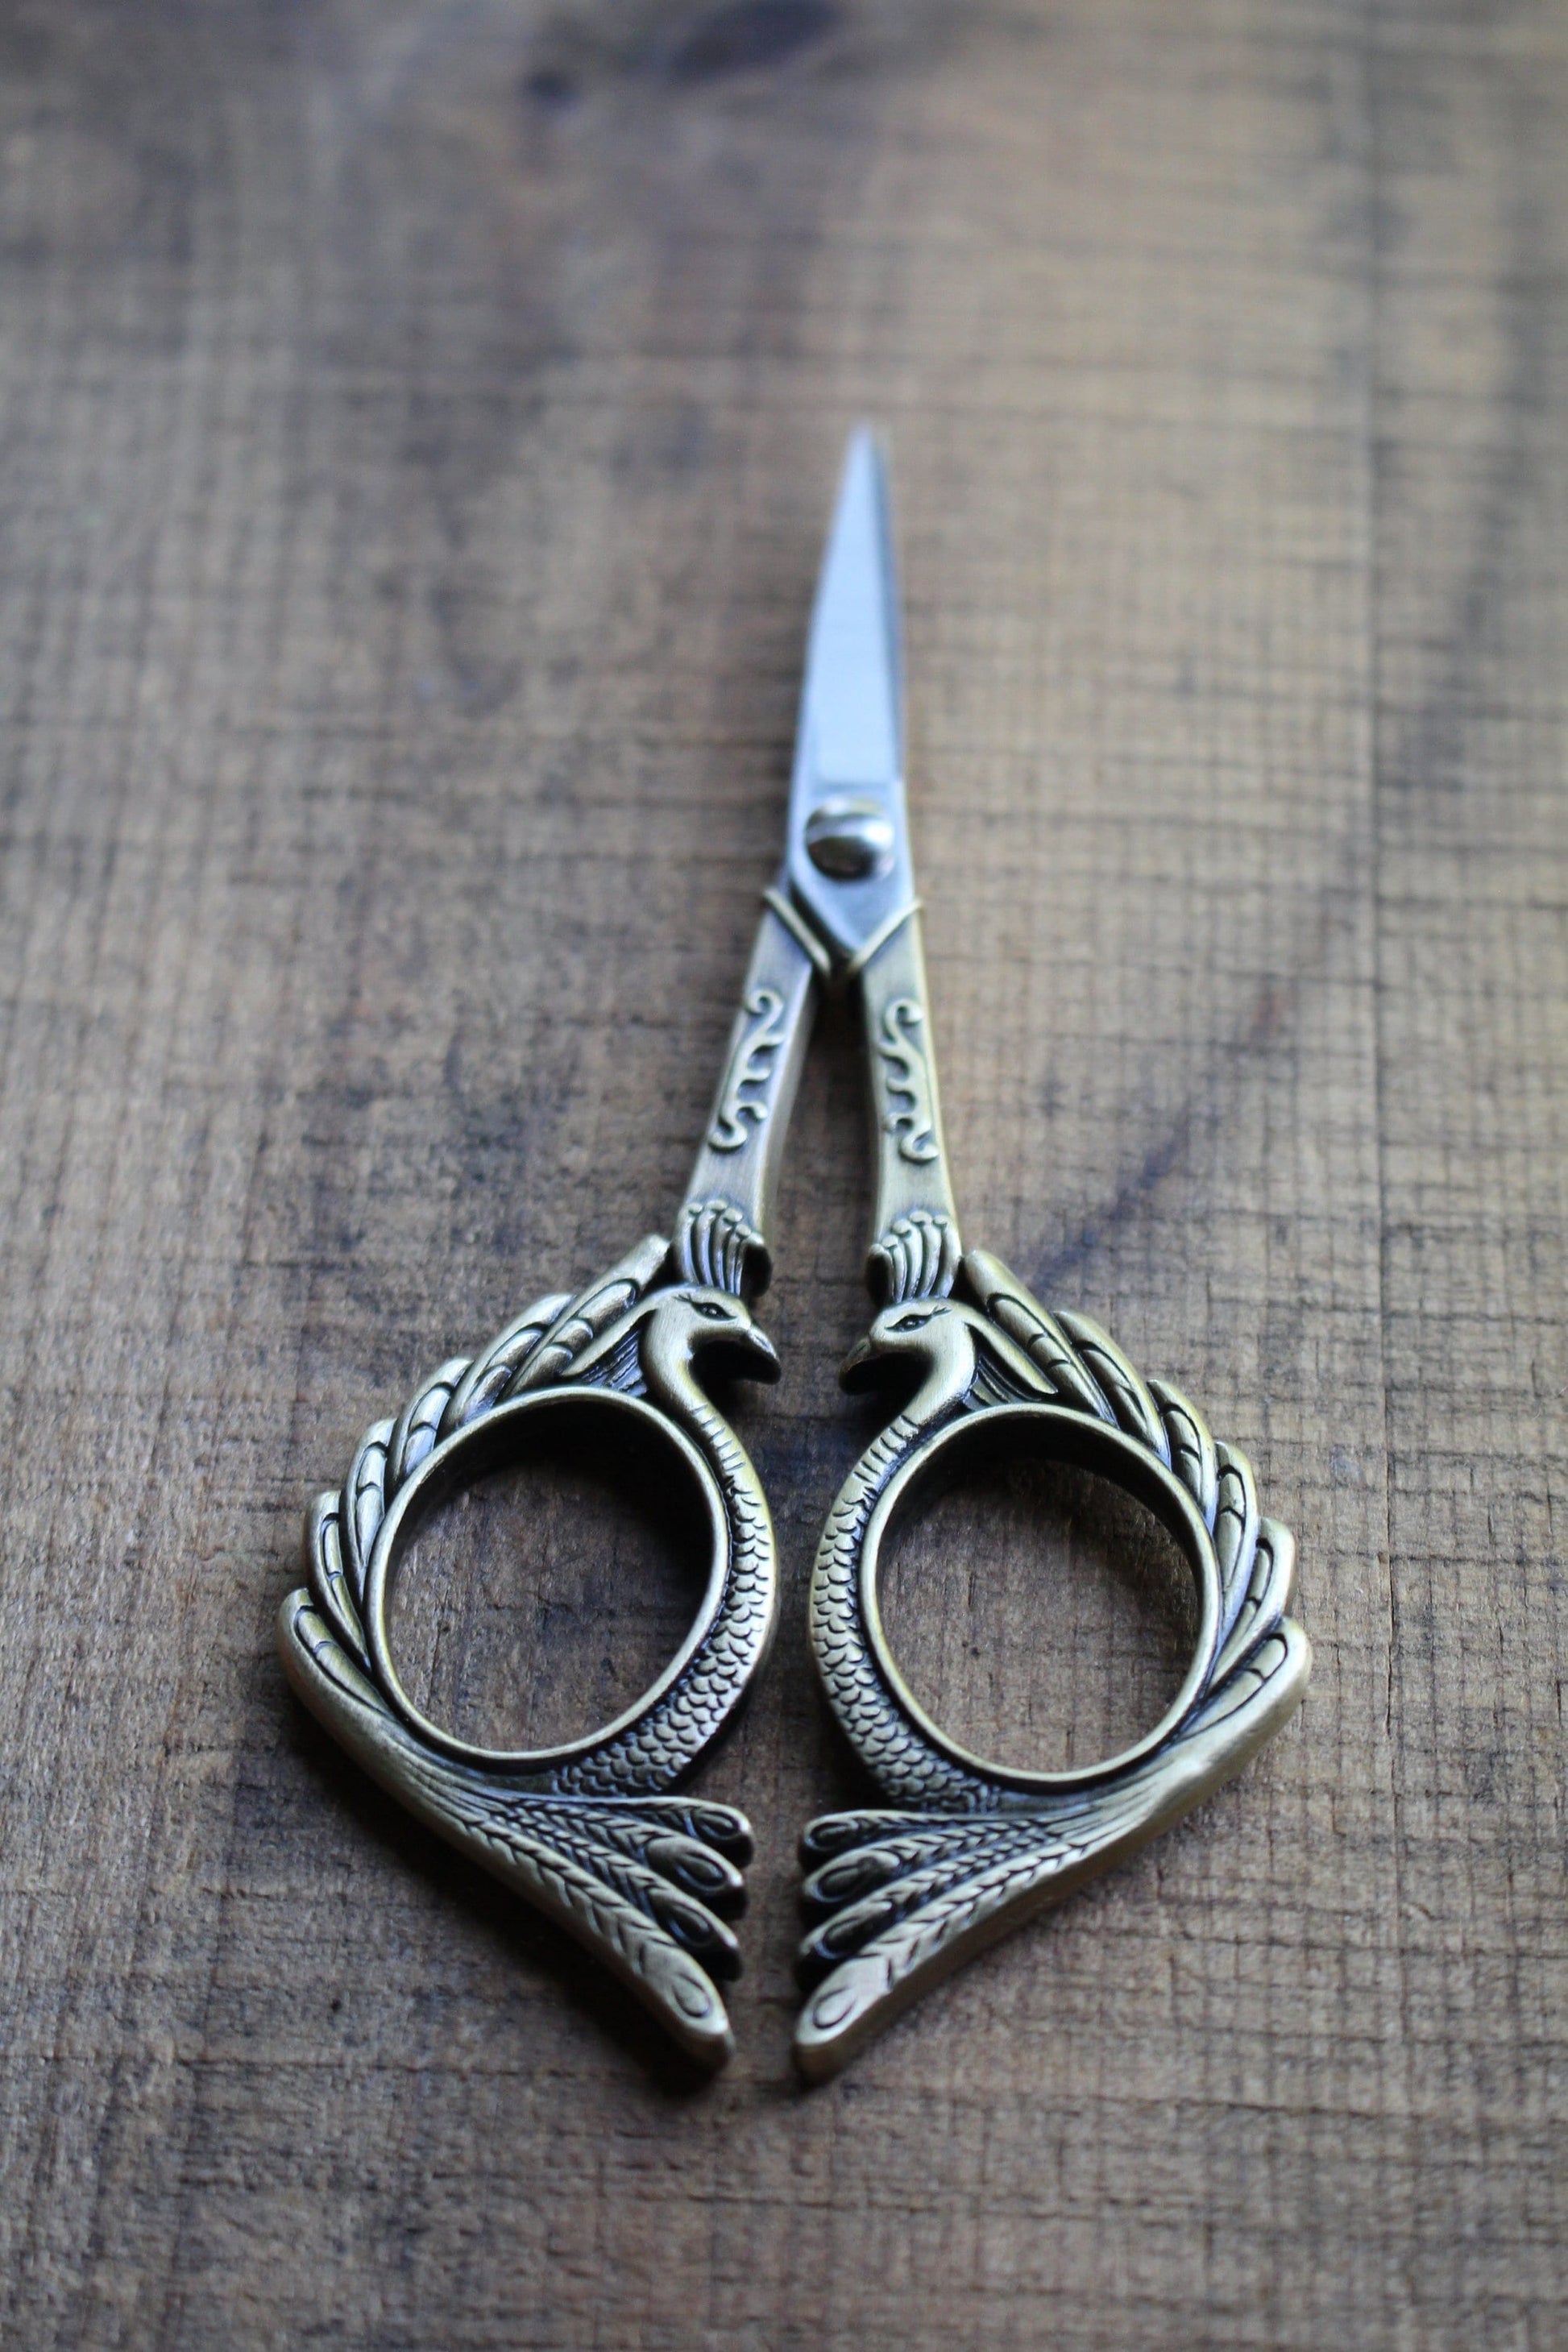 Swan embroidery scissors with high-quality stainless steel blades